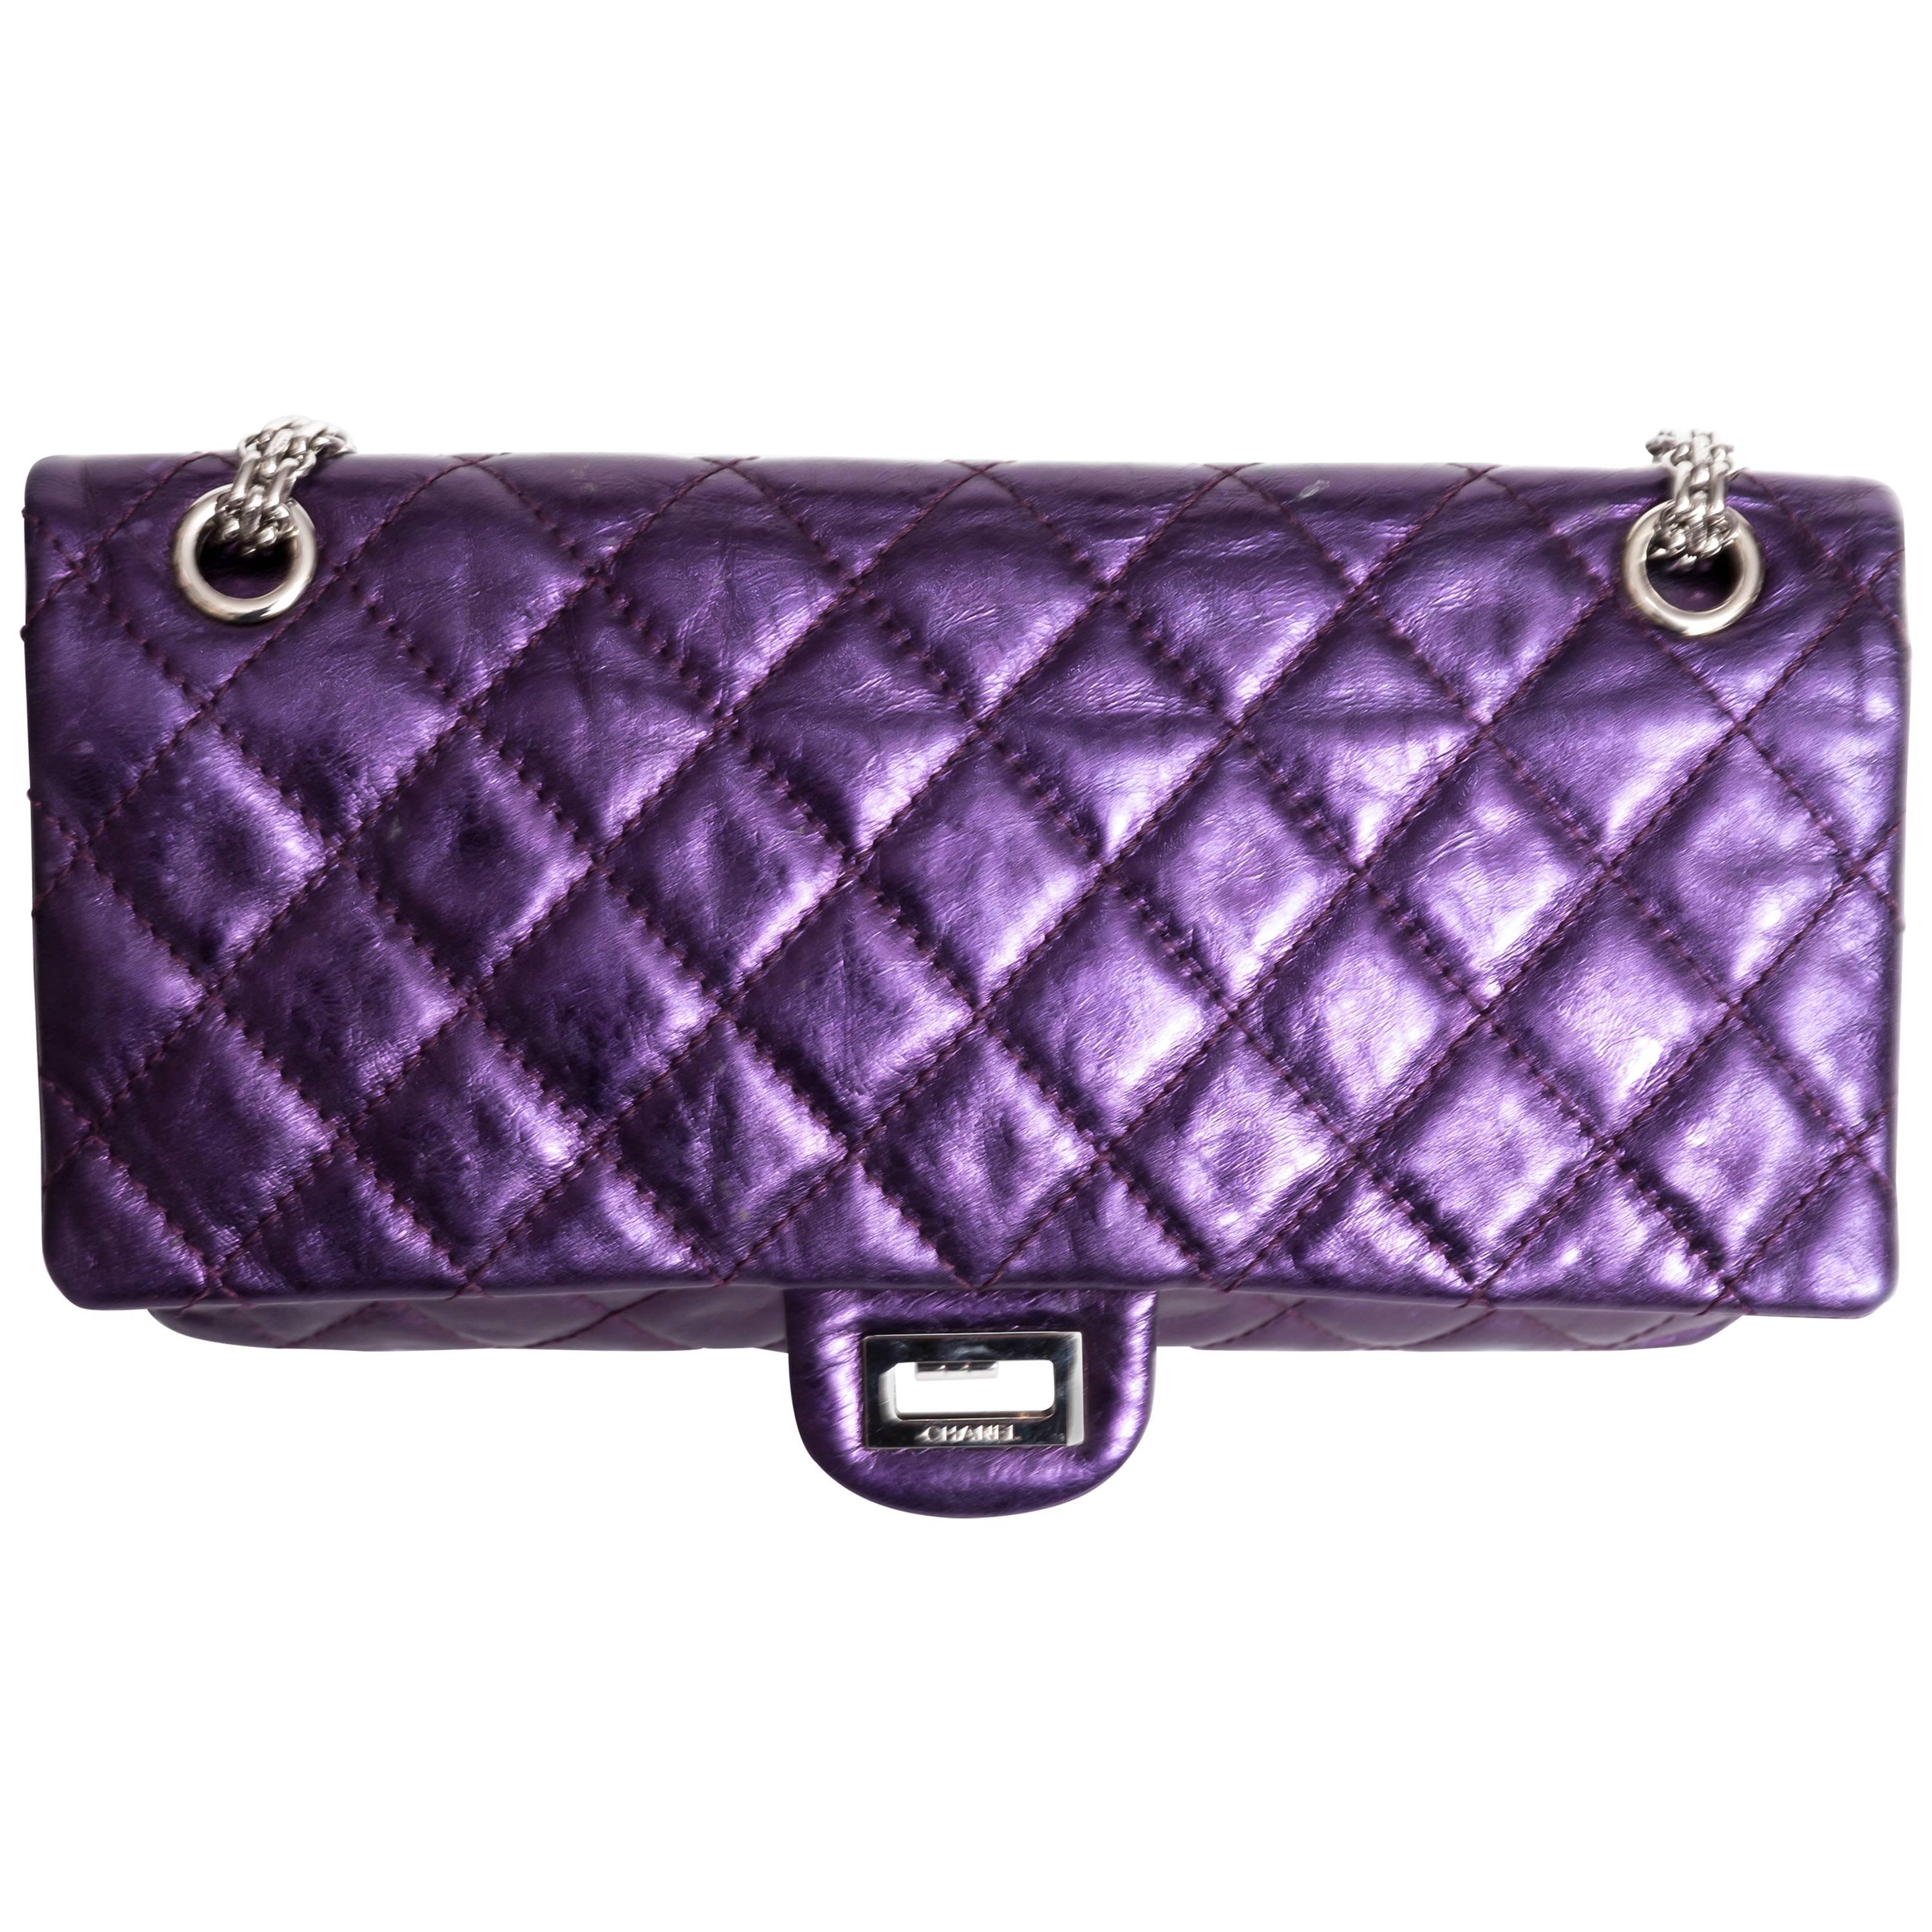 This Chanel Purple Metallic Reissue is in excellent condition.
Authenticity card No 12160656 denotes the years 2008 - 2009
Dust Bag is included.
Features one half moon back pockiet as well as a zip pocket to the top flap of the bag. A large pocket